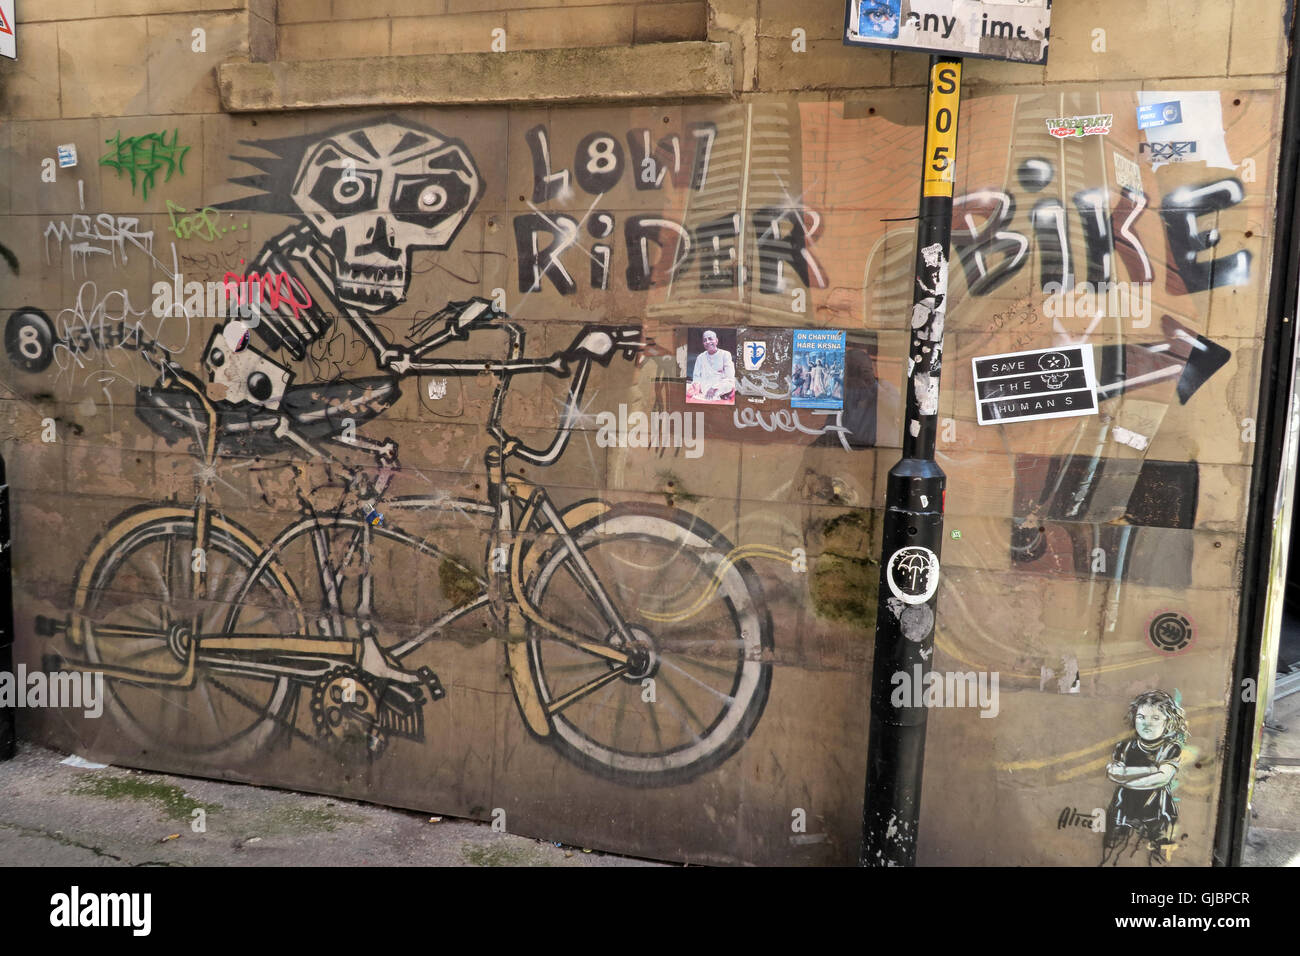 NQ Street art & stencils, Skeleton on a cycle, riding, in Northern Quarter, Manchester, North West England, UK, M1 Stock Photo